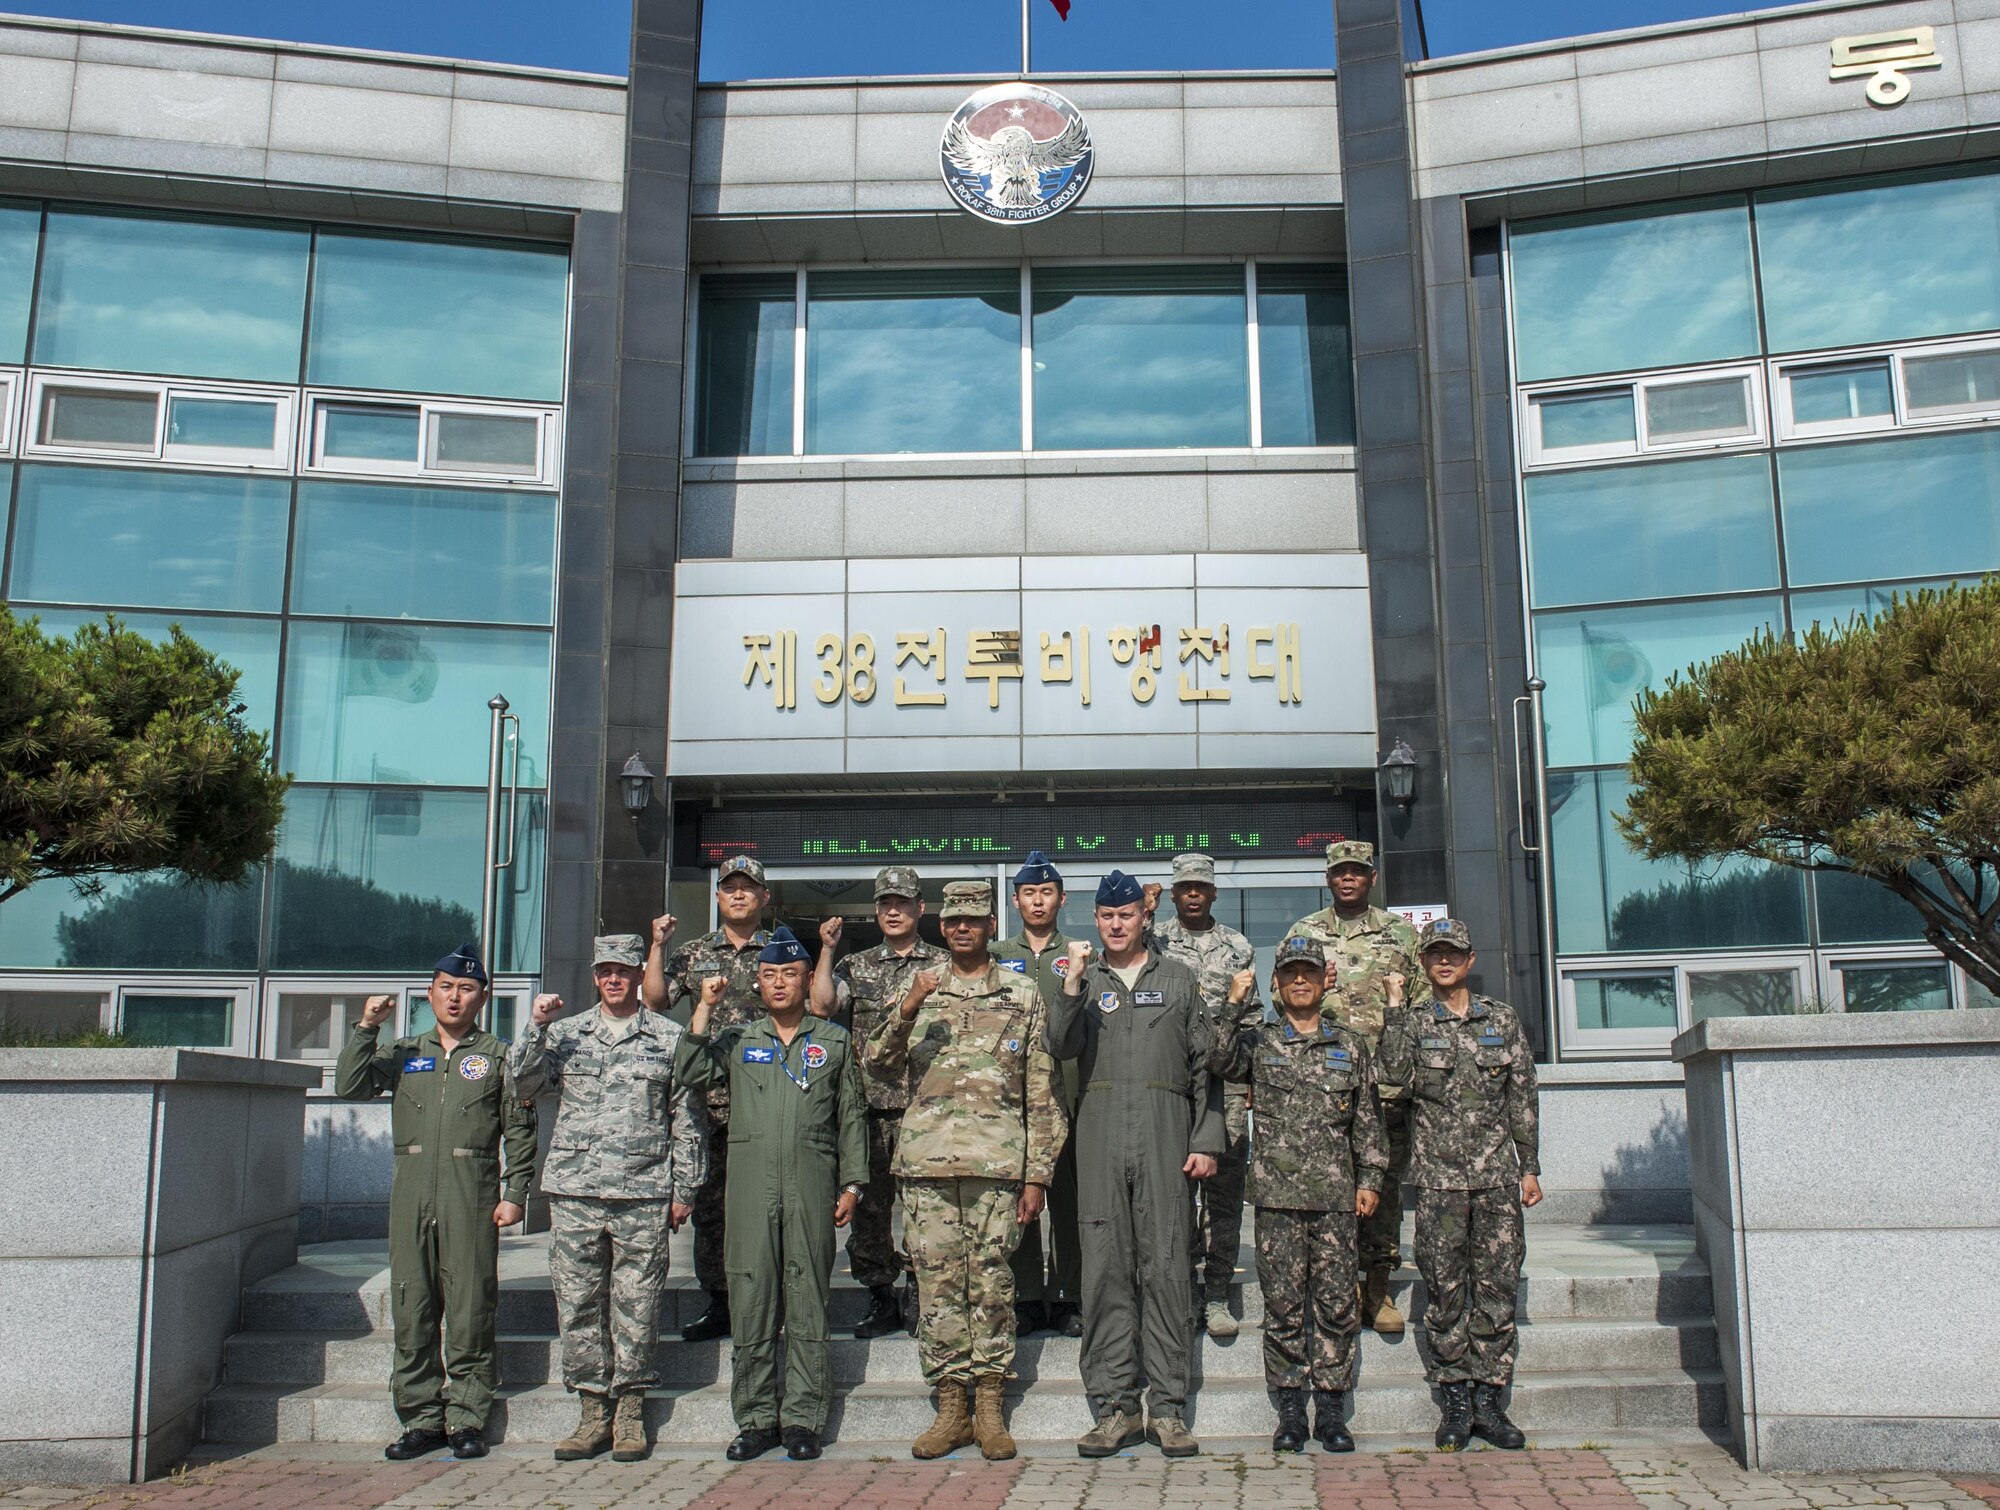 U.S. Army Gen. Vincent K. Brooks, United States Forces Korea commander, center, poses for a photo outside of the 38th Fighter Group Headquarters with members of the Wolf Pack and Republic of Korea Air Force at Kunsan Air Base, Republic of Korea, June 22, 2017. Brooks visited Kunsan Air Base to meet different squadrons which contribute to the mission capable forces he commands and familiarize himself with the base and its capabilities. (U.S. Air Force photo by Senior Airman Colville McFee/Released)